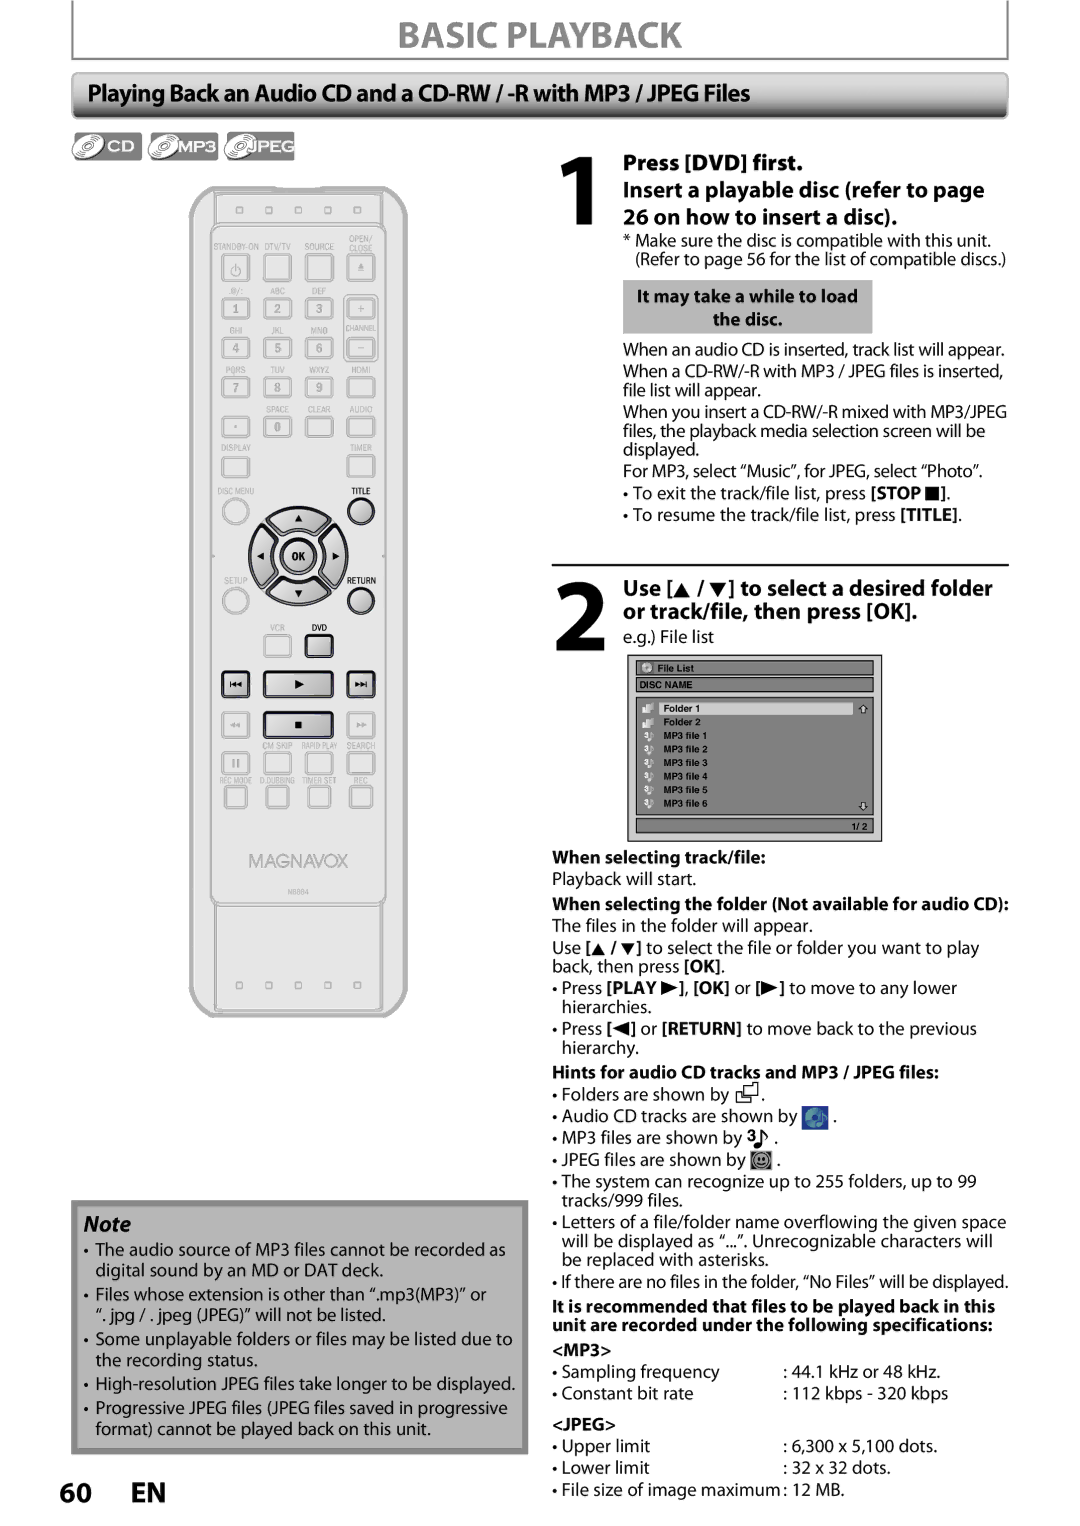 Magnavox 1VMN26713A owner manual When selecting track/file, When selecting the folder Not available for audio CD, MP3 